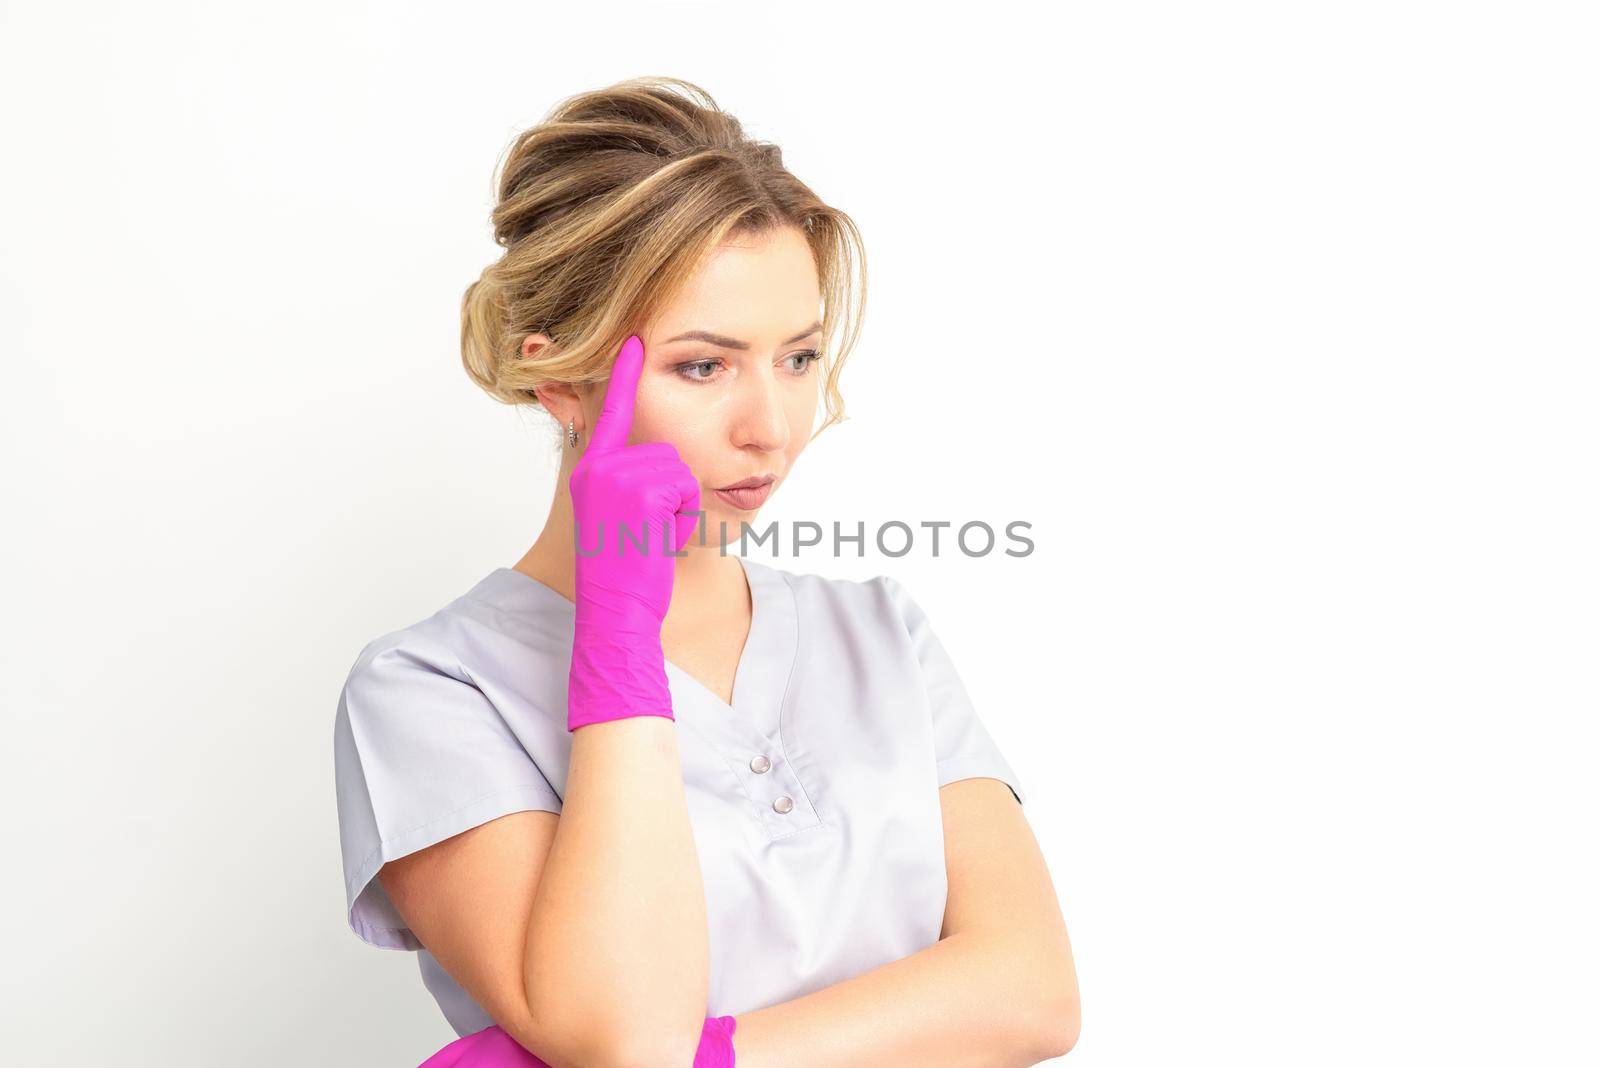 Young caucasian female doctor wearing gloves thoughtful looking away isolated on white background